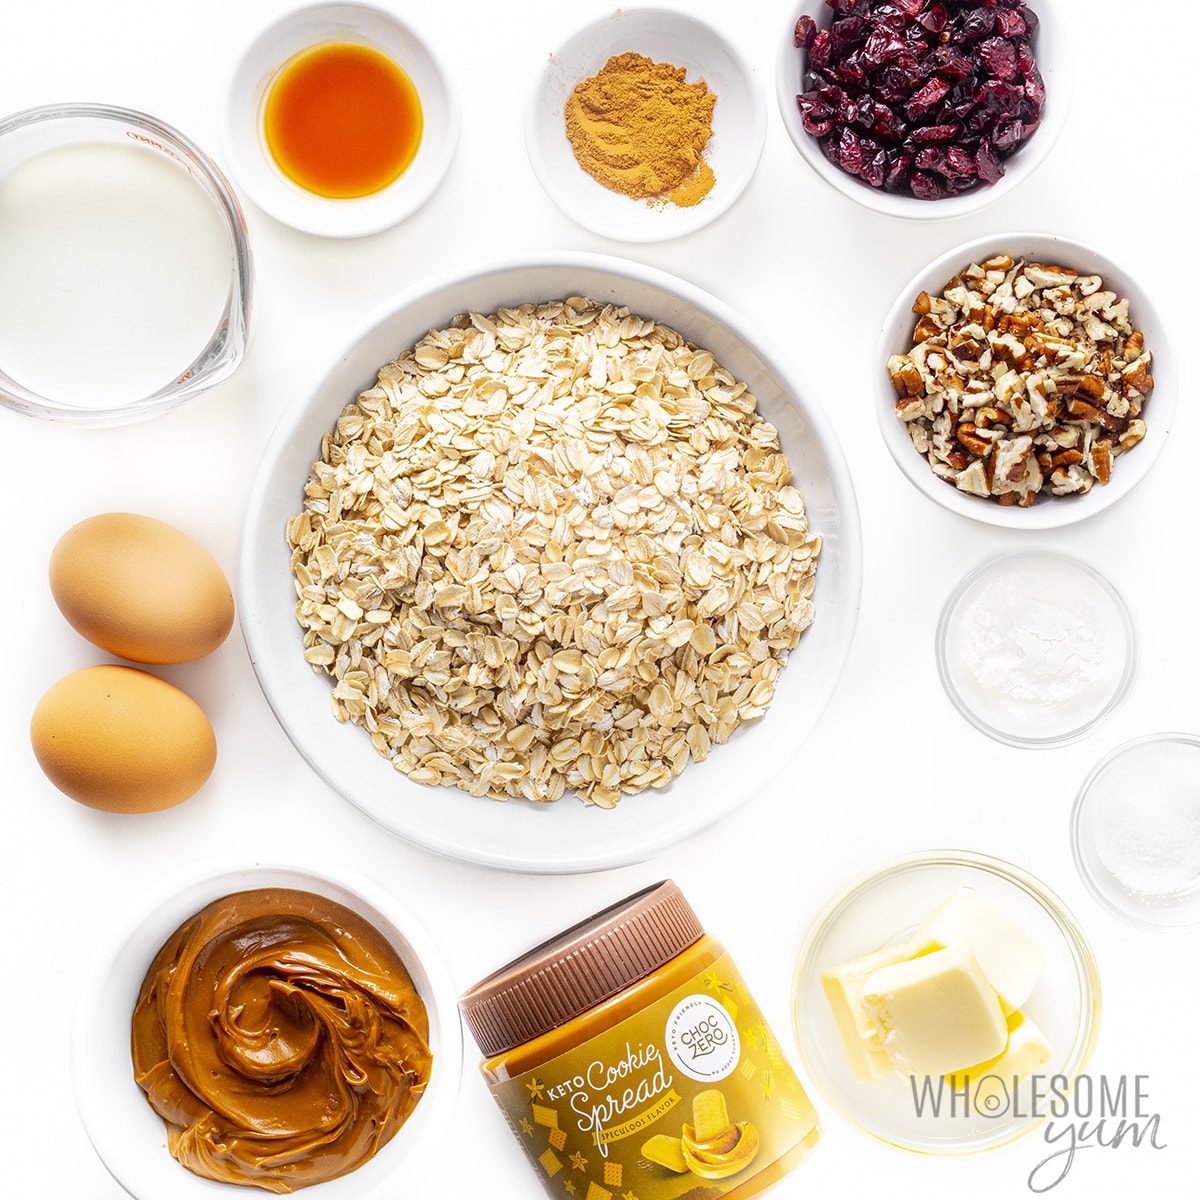 Baked oatmeal ingredients in bowls.